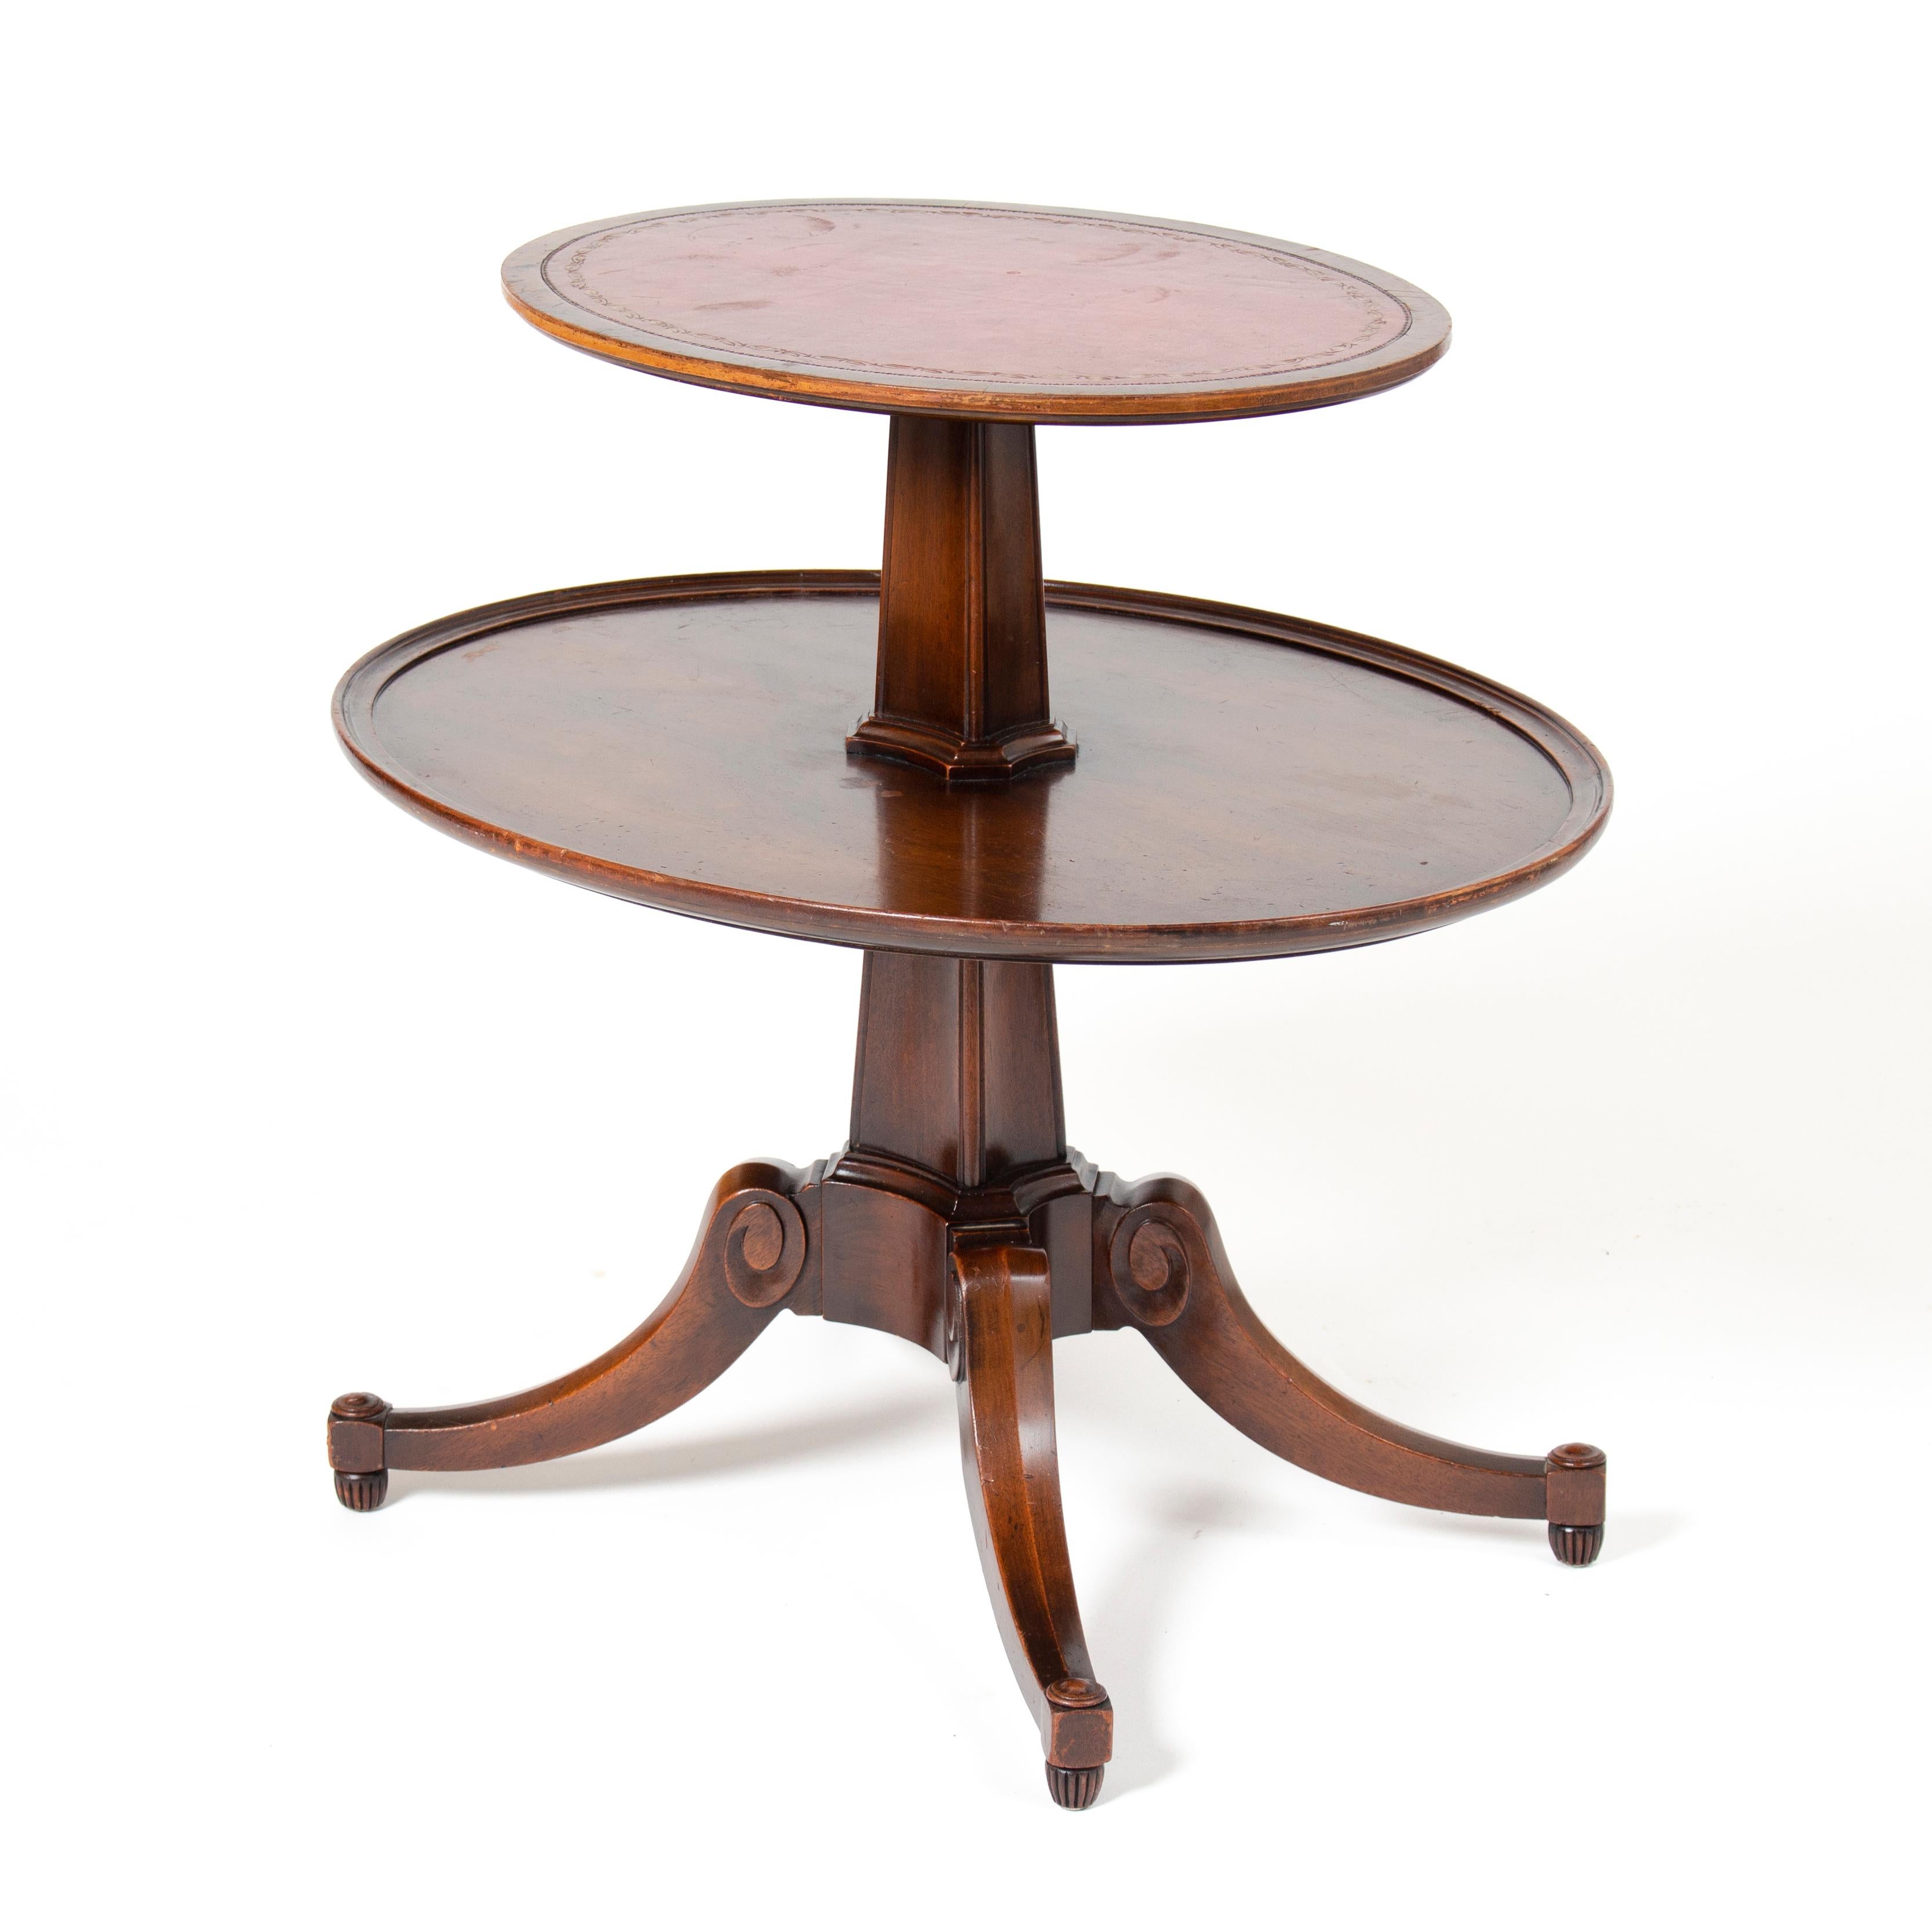 The multi-level tables produced around 1880 could be used for various purposes depending on the type of table and where they were placed. Here are some possible uses:

Decoration: Multi-level tables were often placed as decorative elements in the